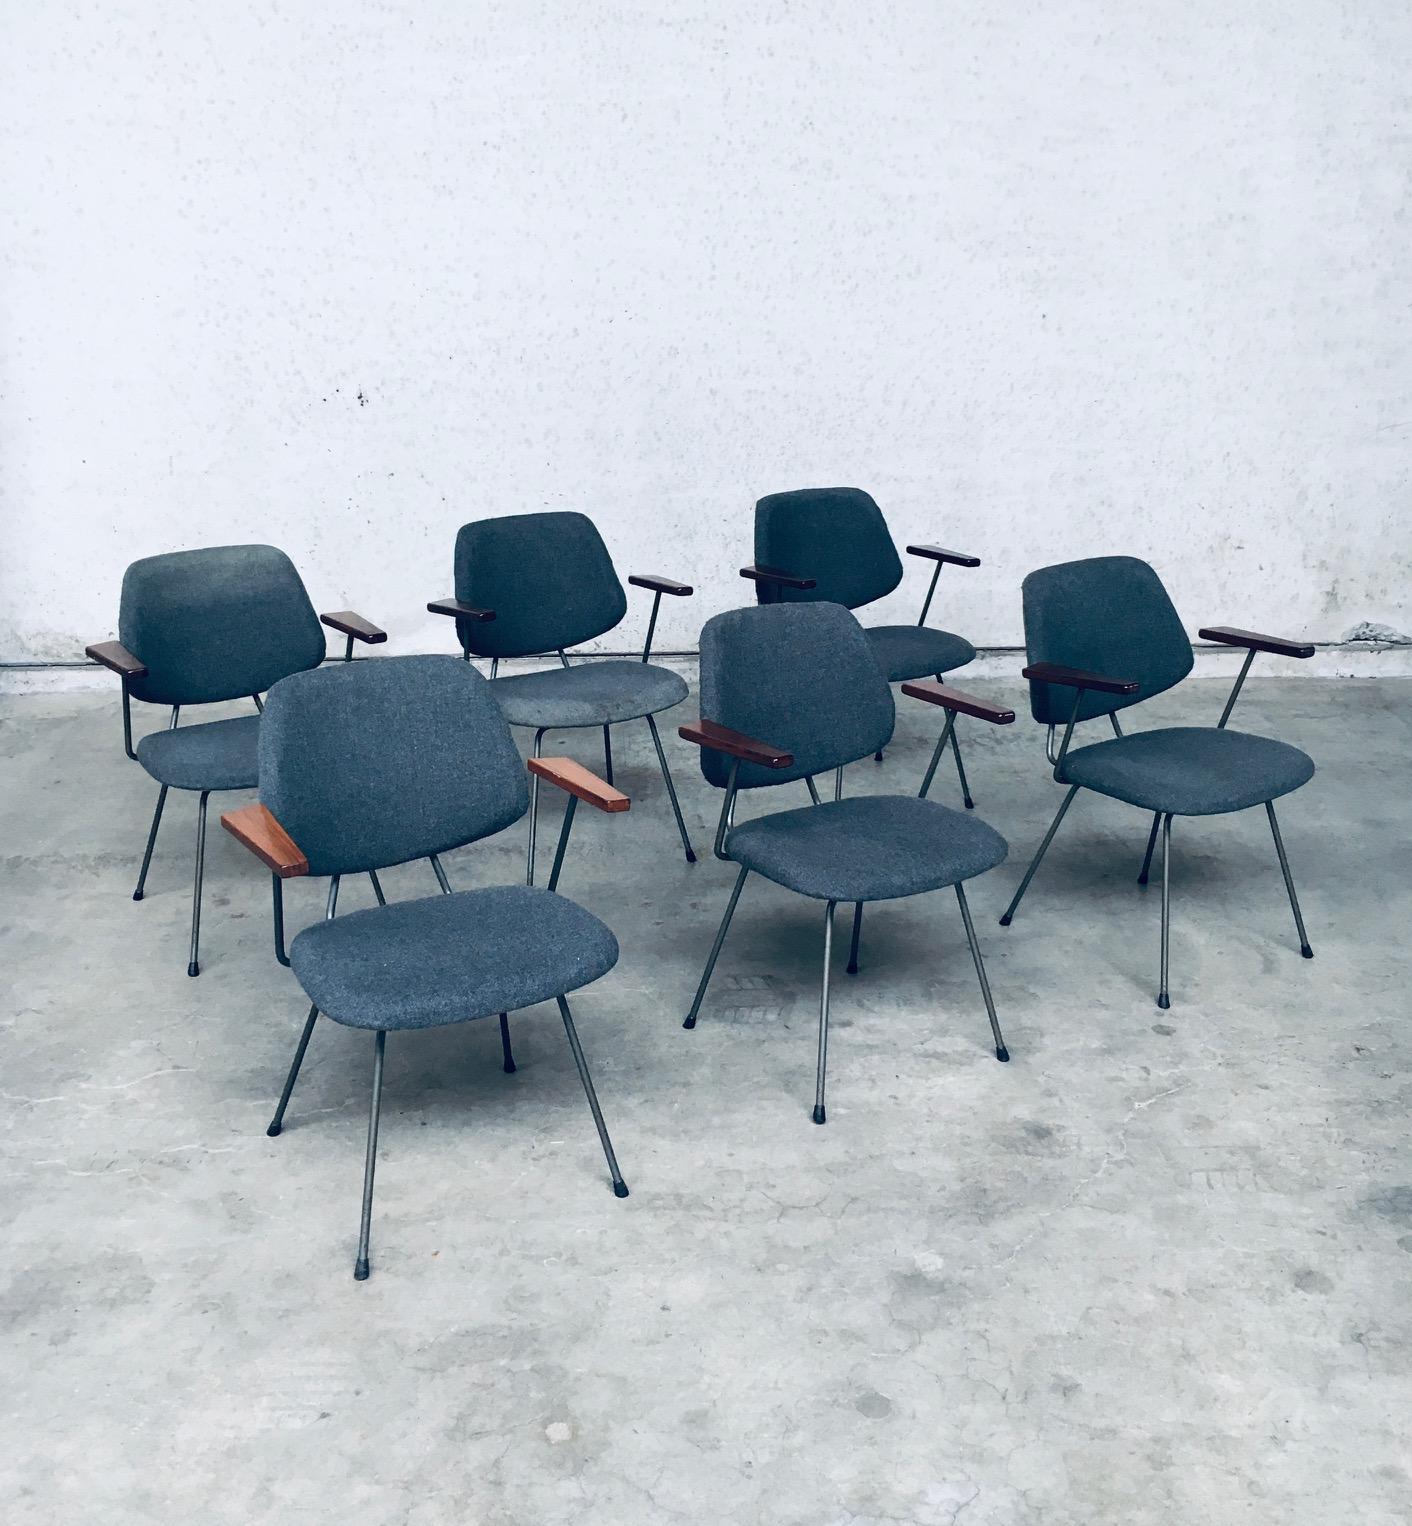 Vintage Midcentury Modern Dutch Design Office Arm Chair set of 6 by Wim Rietveld for Kembo. Made in the Netherlands, 1950's period. Industrial design board room chairs with grey blueish fabric on grey lacquered metal tubular steel frame with